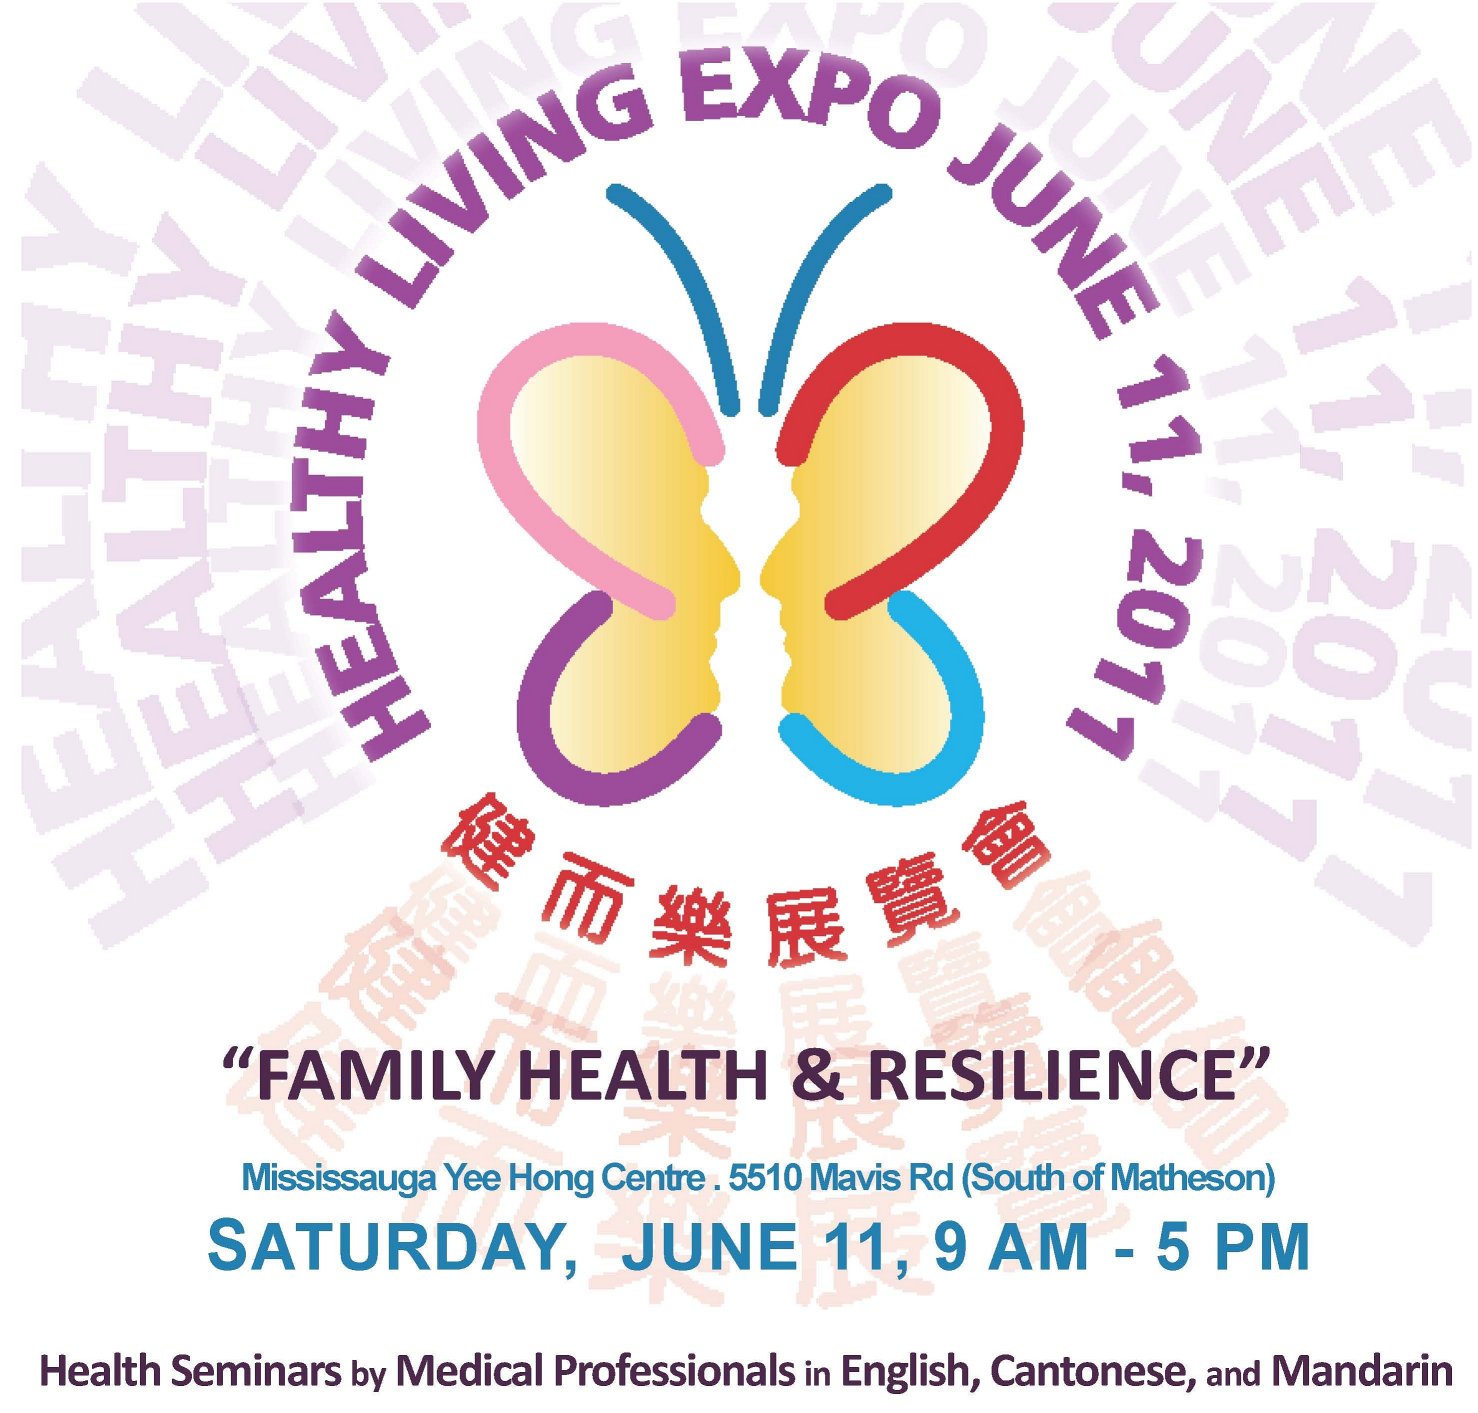 Healthy Living Expo 2011 Logo image from http://www.cpbexpo.com/